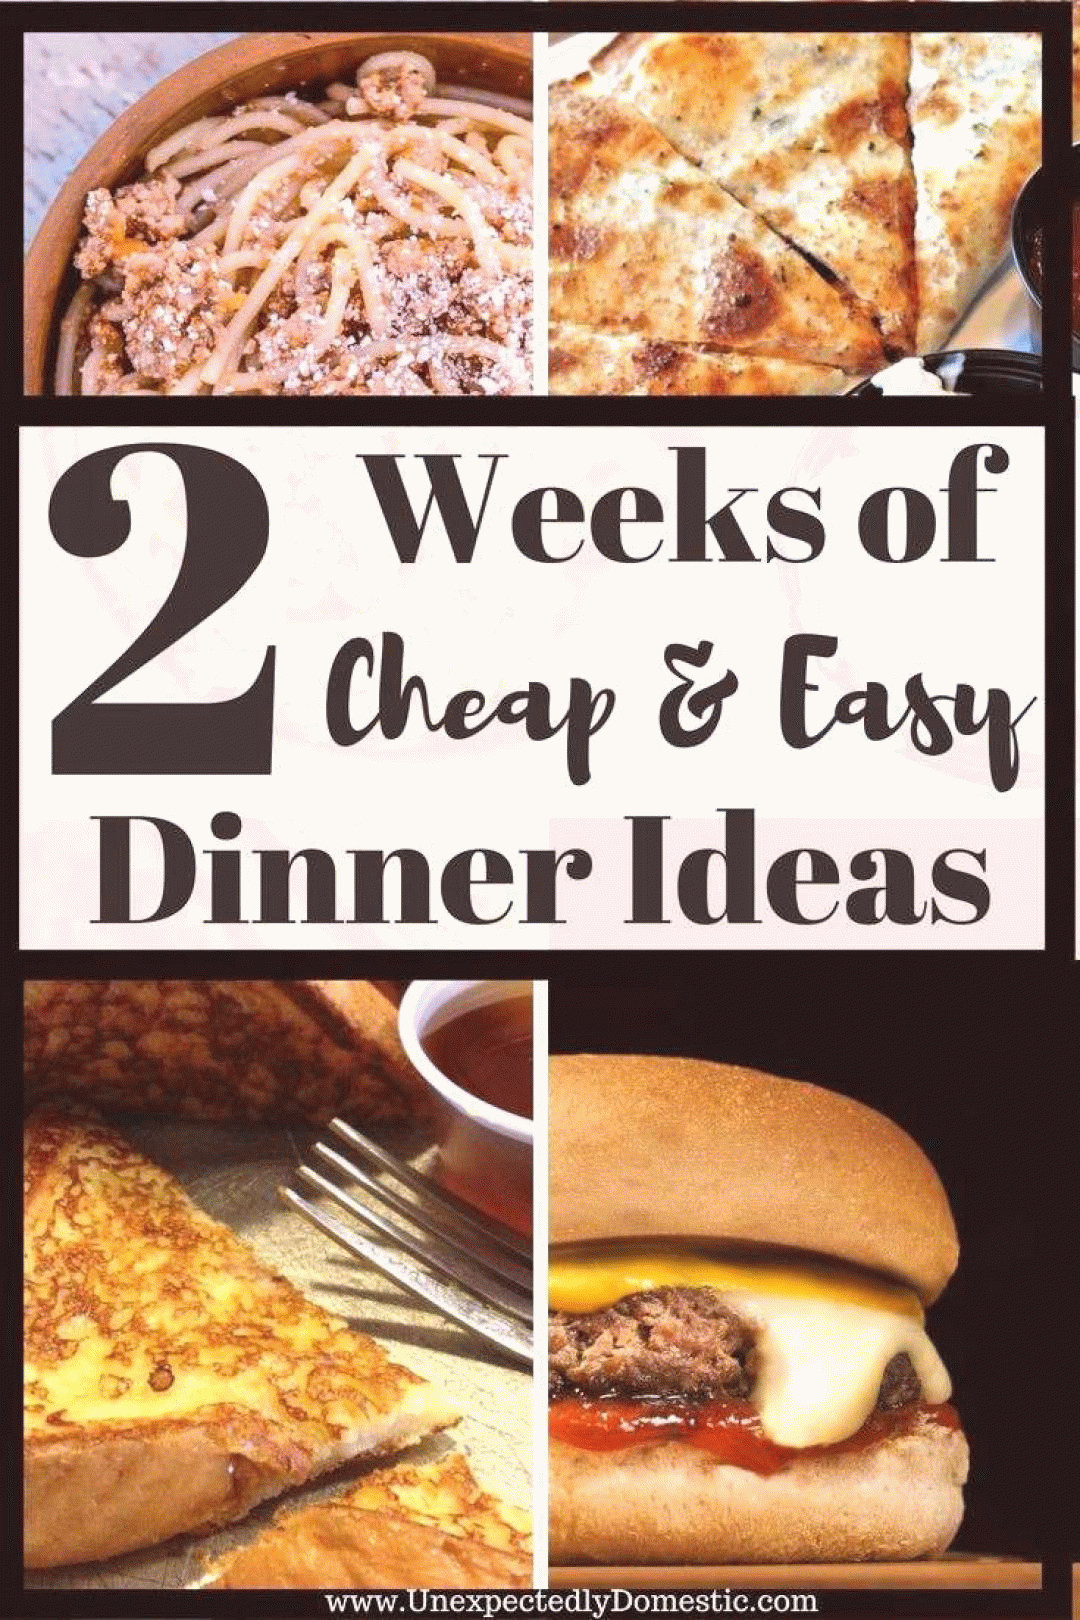 Cheap Dinner Ideas For 2
 2 weeks of cheap and easy dinner ideas These are easy